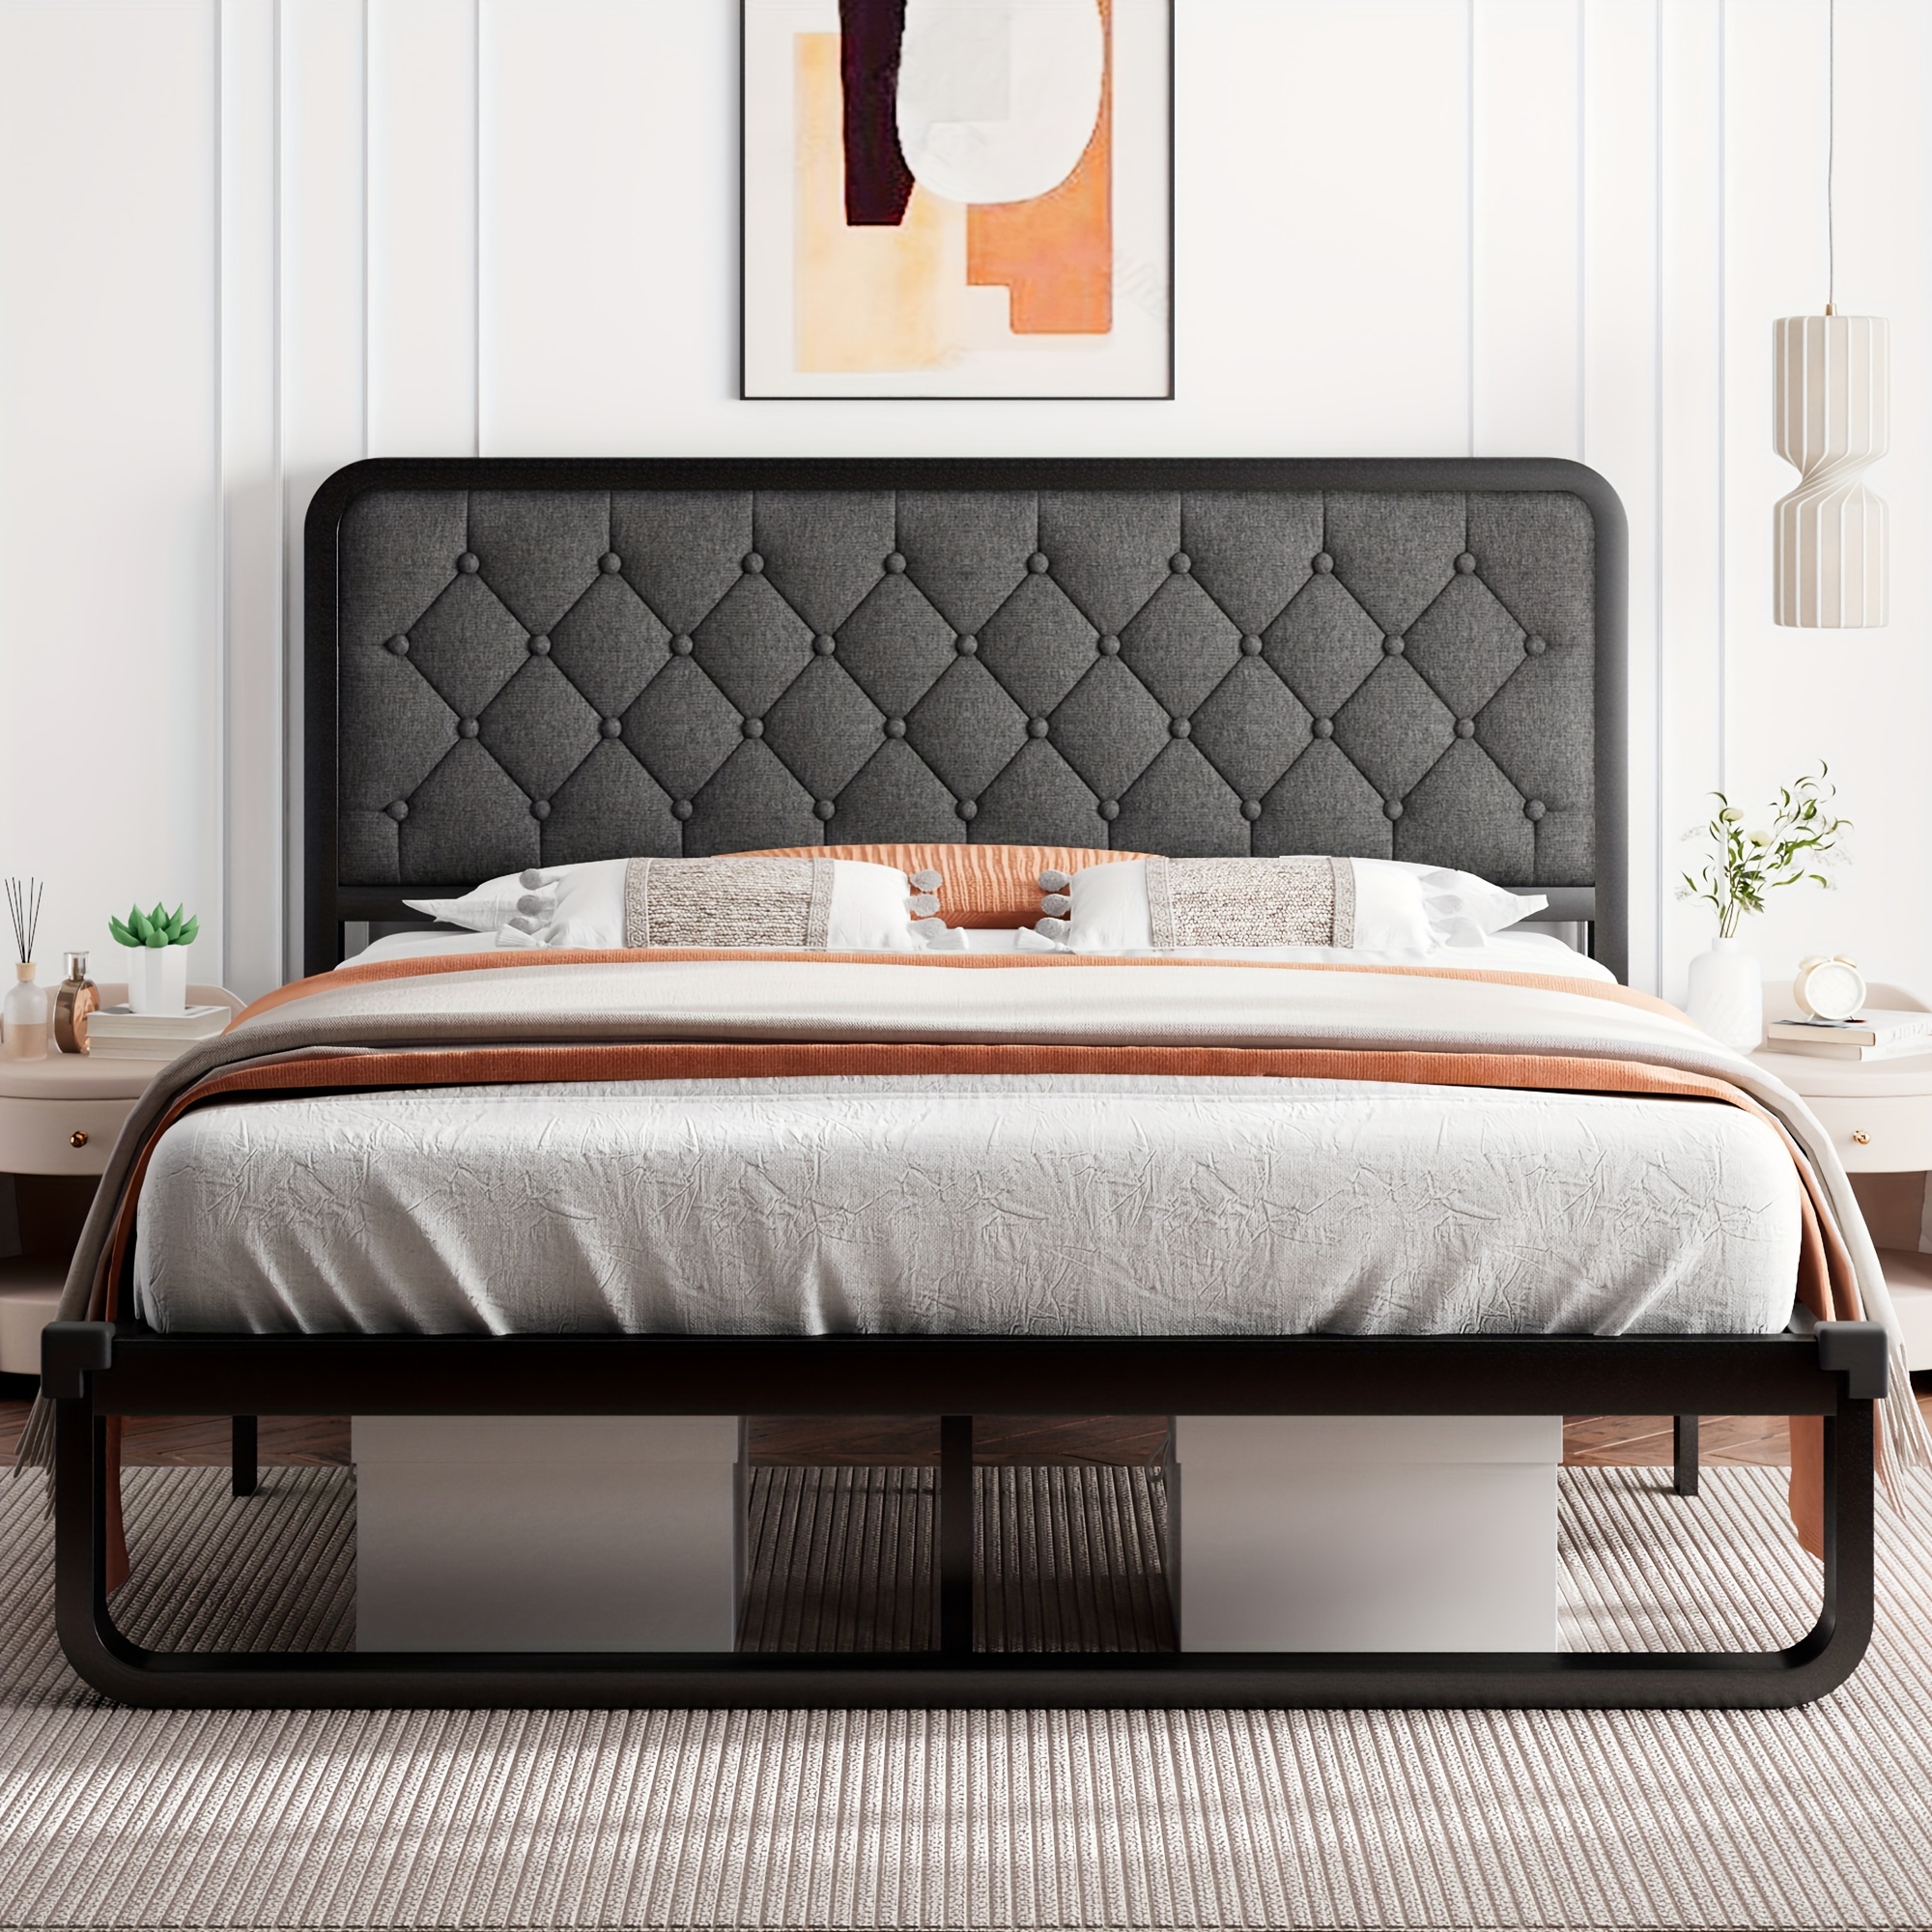 

14" Metal Bed Frame With Headboard, Curved Platform Bed Frame, Thicker Metal Steel Slats Support, Noise-free, Easy Assembly